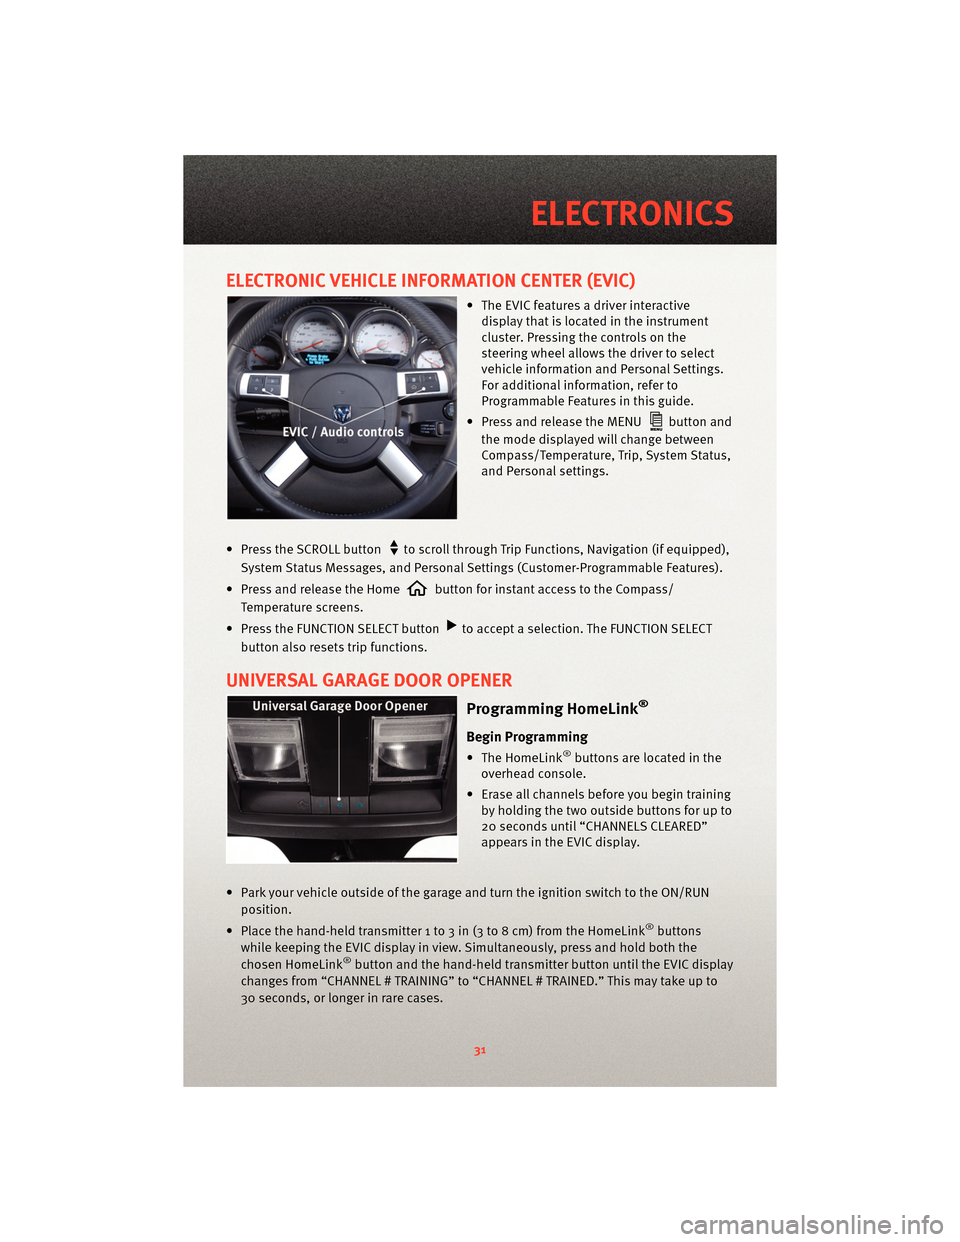 DODGE CHARGER 2010 7.G User Guide ELECTRONIC VEHICLE INFORMATION CENTER (EVIC)
• The EVIC features a driver interactivedisplay that is located in the instrument
cluster. Pressing the controls on the
steering wheel allows the driver 